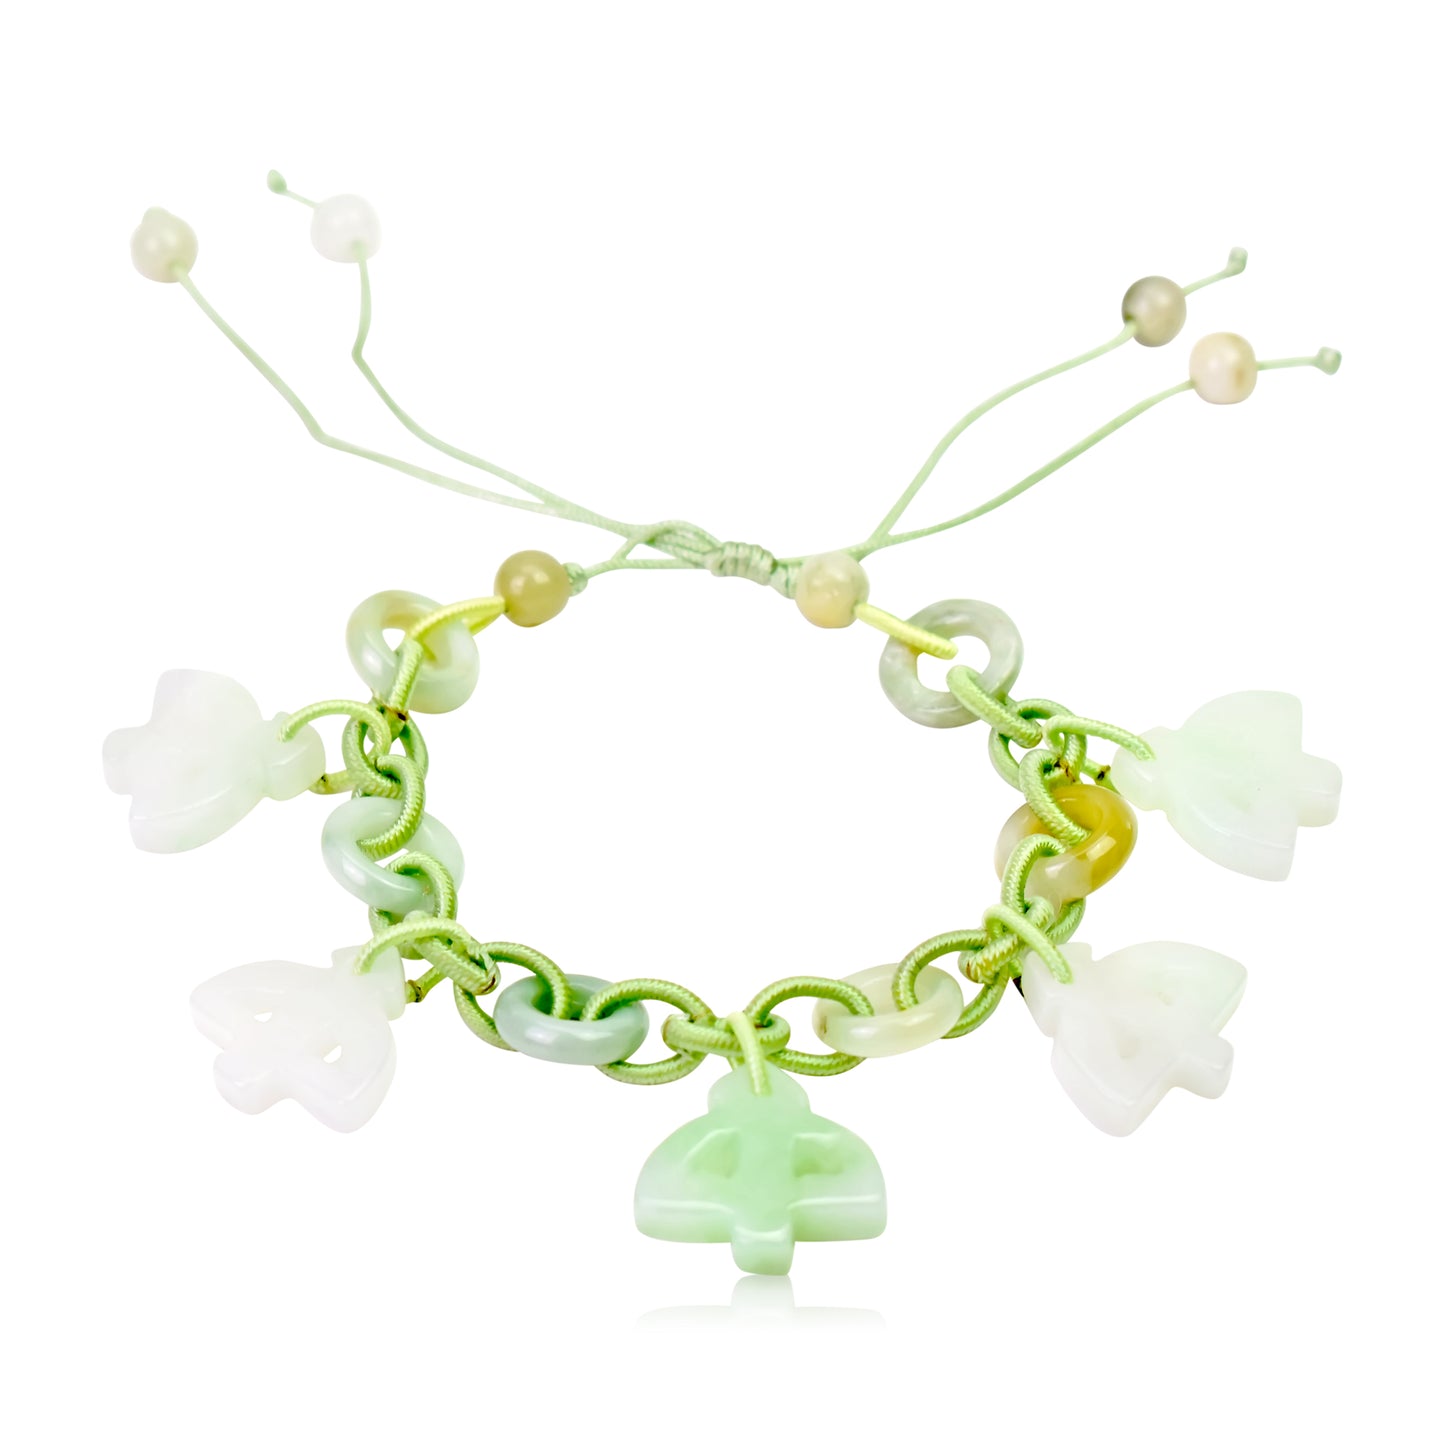 Celebrate your Zodiac Sign with Sagittarius Astrology Jade Bracelet made with Sea Green Cord